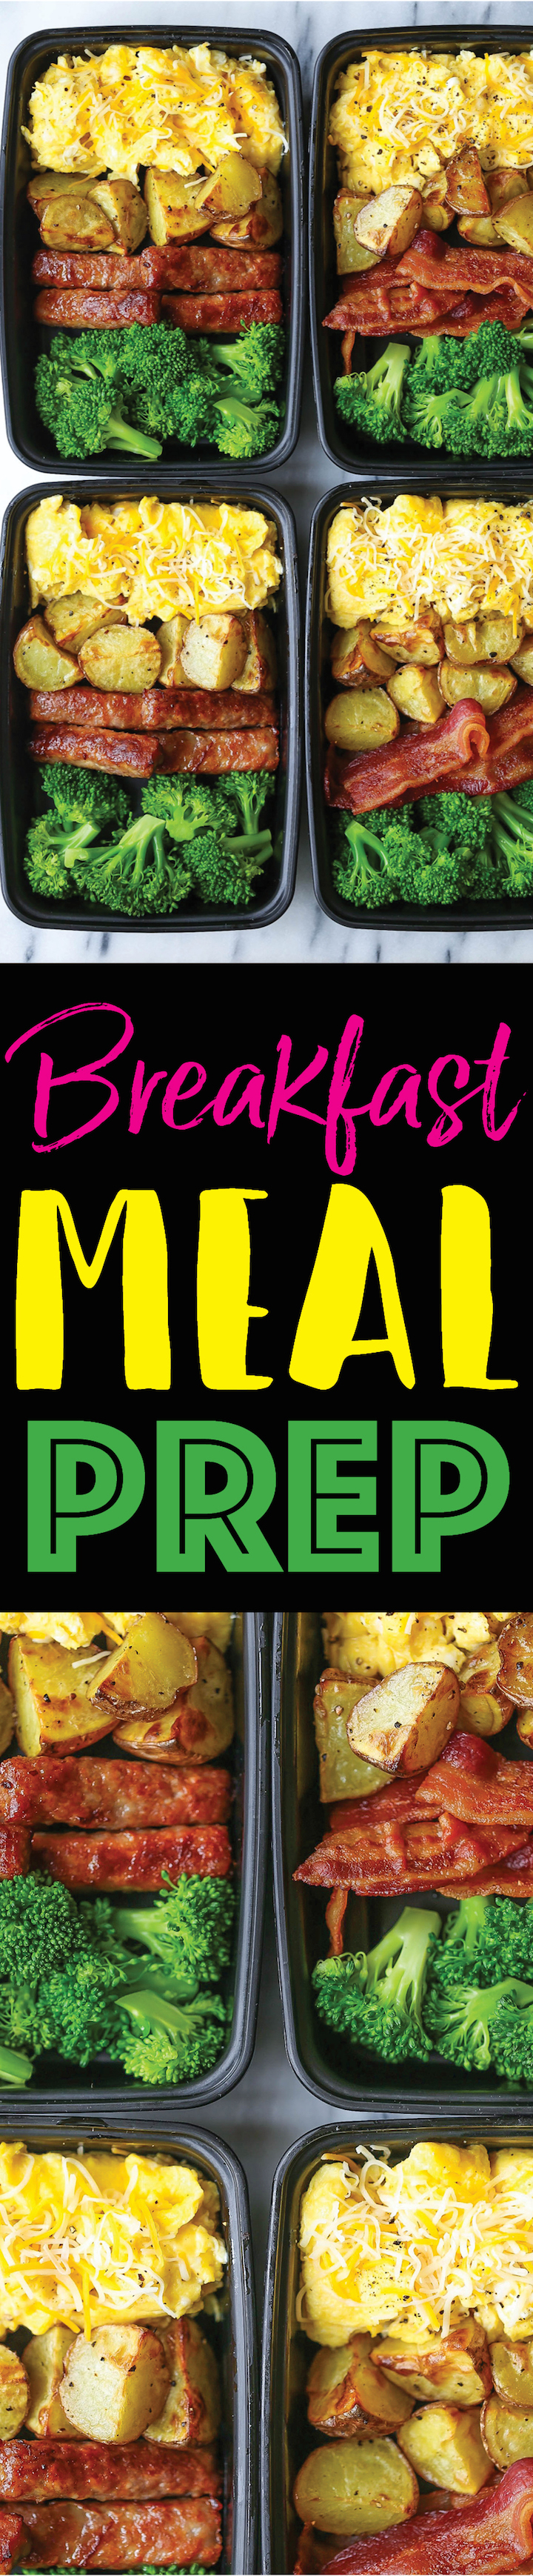 Breakfast Meal Prep - Now you can sleep in and eat a filling and hearty breakfast ALL WEEK LONG! Eggs, bacon or sausage, roasted potatoes and broccoli!